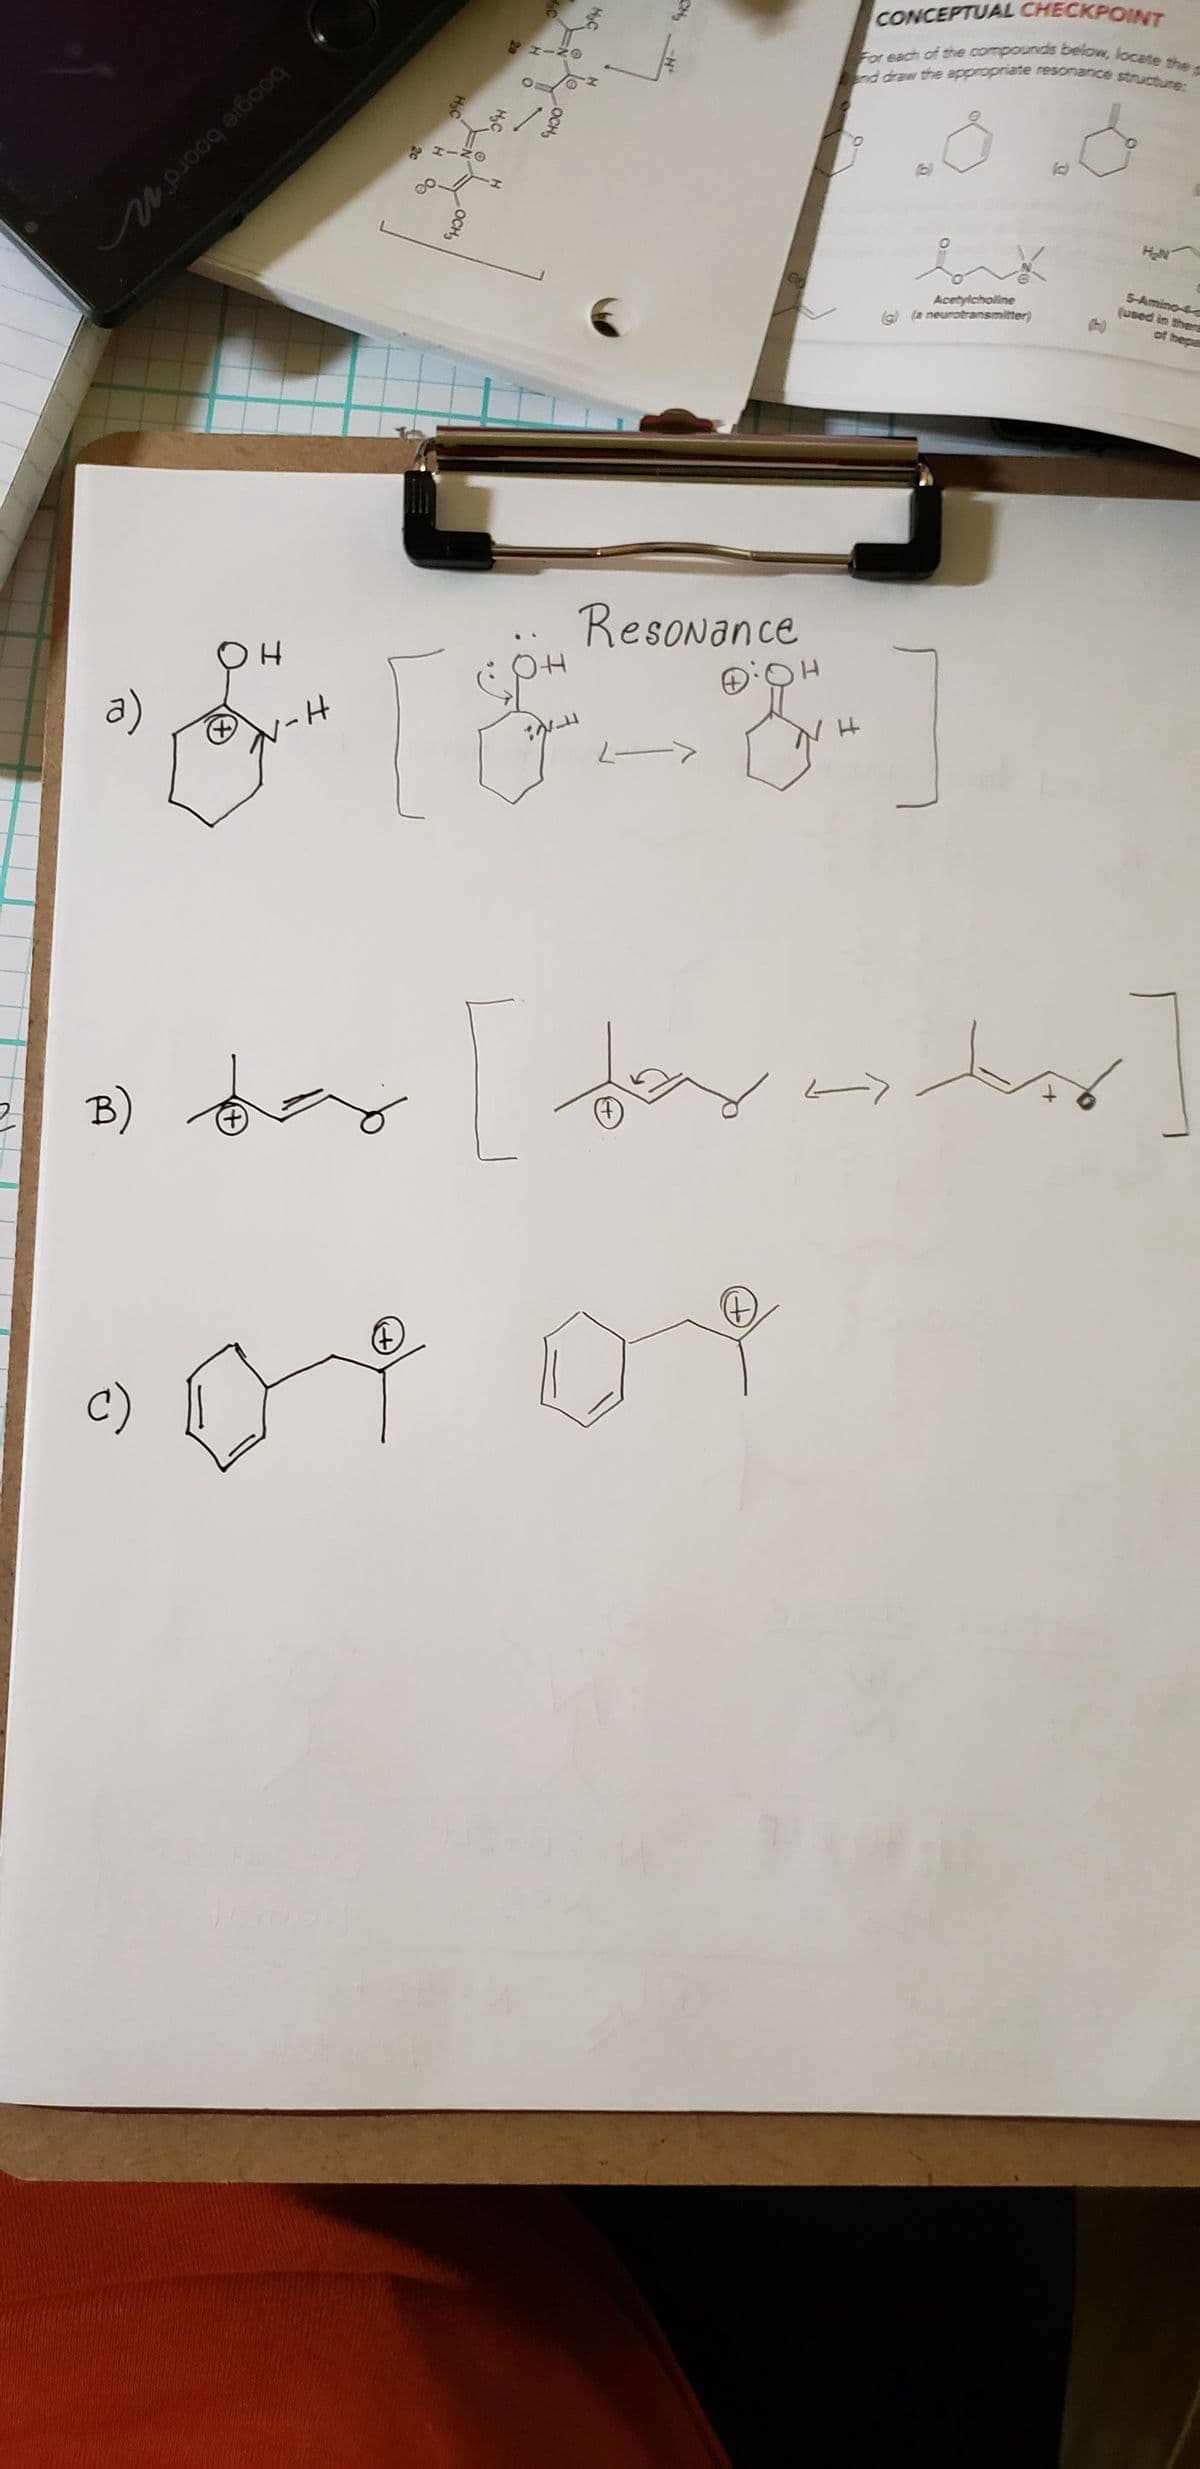 Moog
a)
он
c)
N-H
LOCH3
1-20
O:
H
Resonance
2->
00
CONCEPTUAL CHECKPOINT
and draw the appropriate resonance structure:
For each of the compounds below, locate the F
01 01
So
Acetylcholine
(a neurotransmitter)
H
H
Sun ]
B)
3) bar for ser
(+)
5-Amino-
(used in thera
of hepe